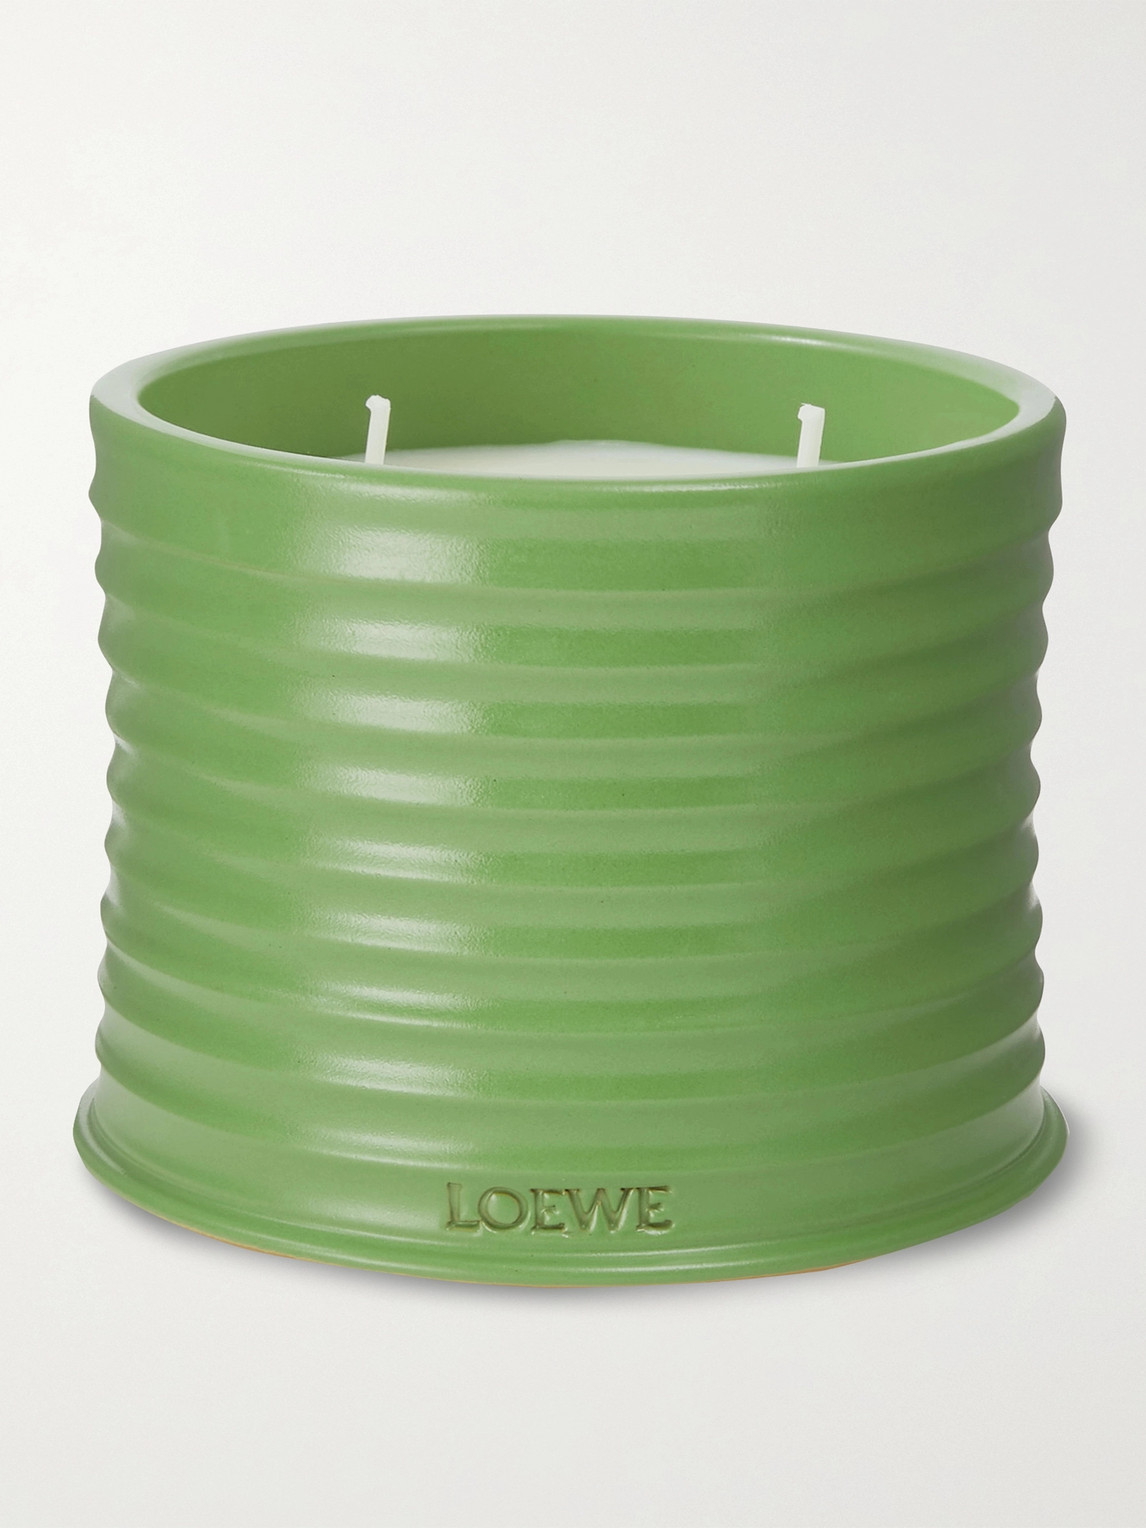 Loewe Home Scents Luscious Pea Scented Candle, 610g In Colorless